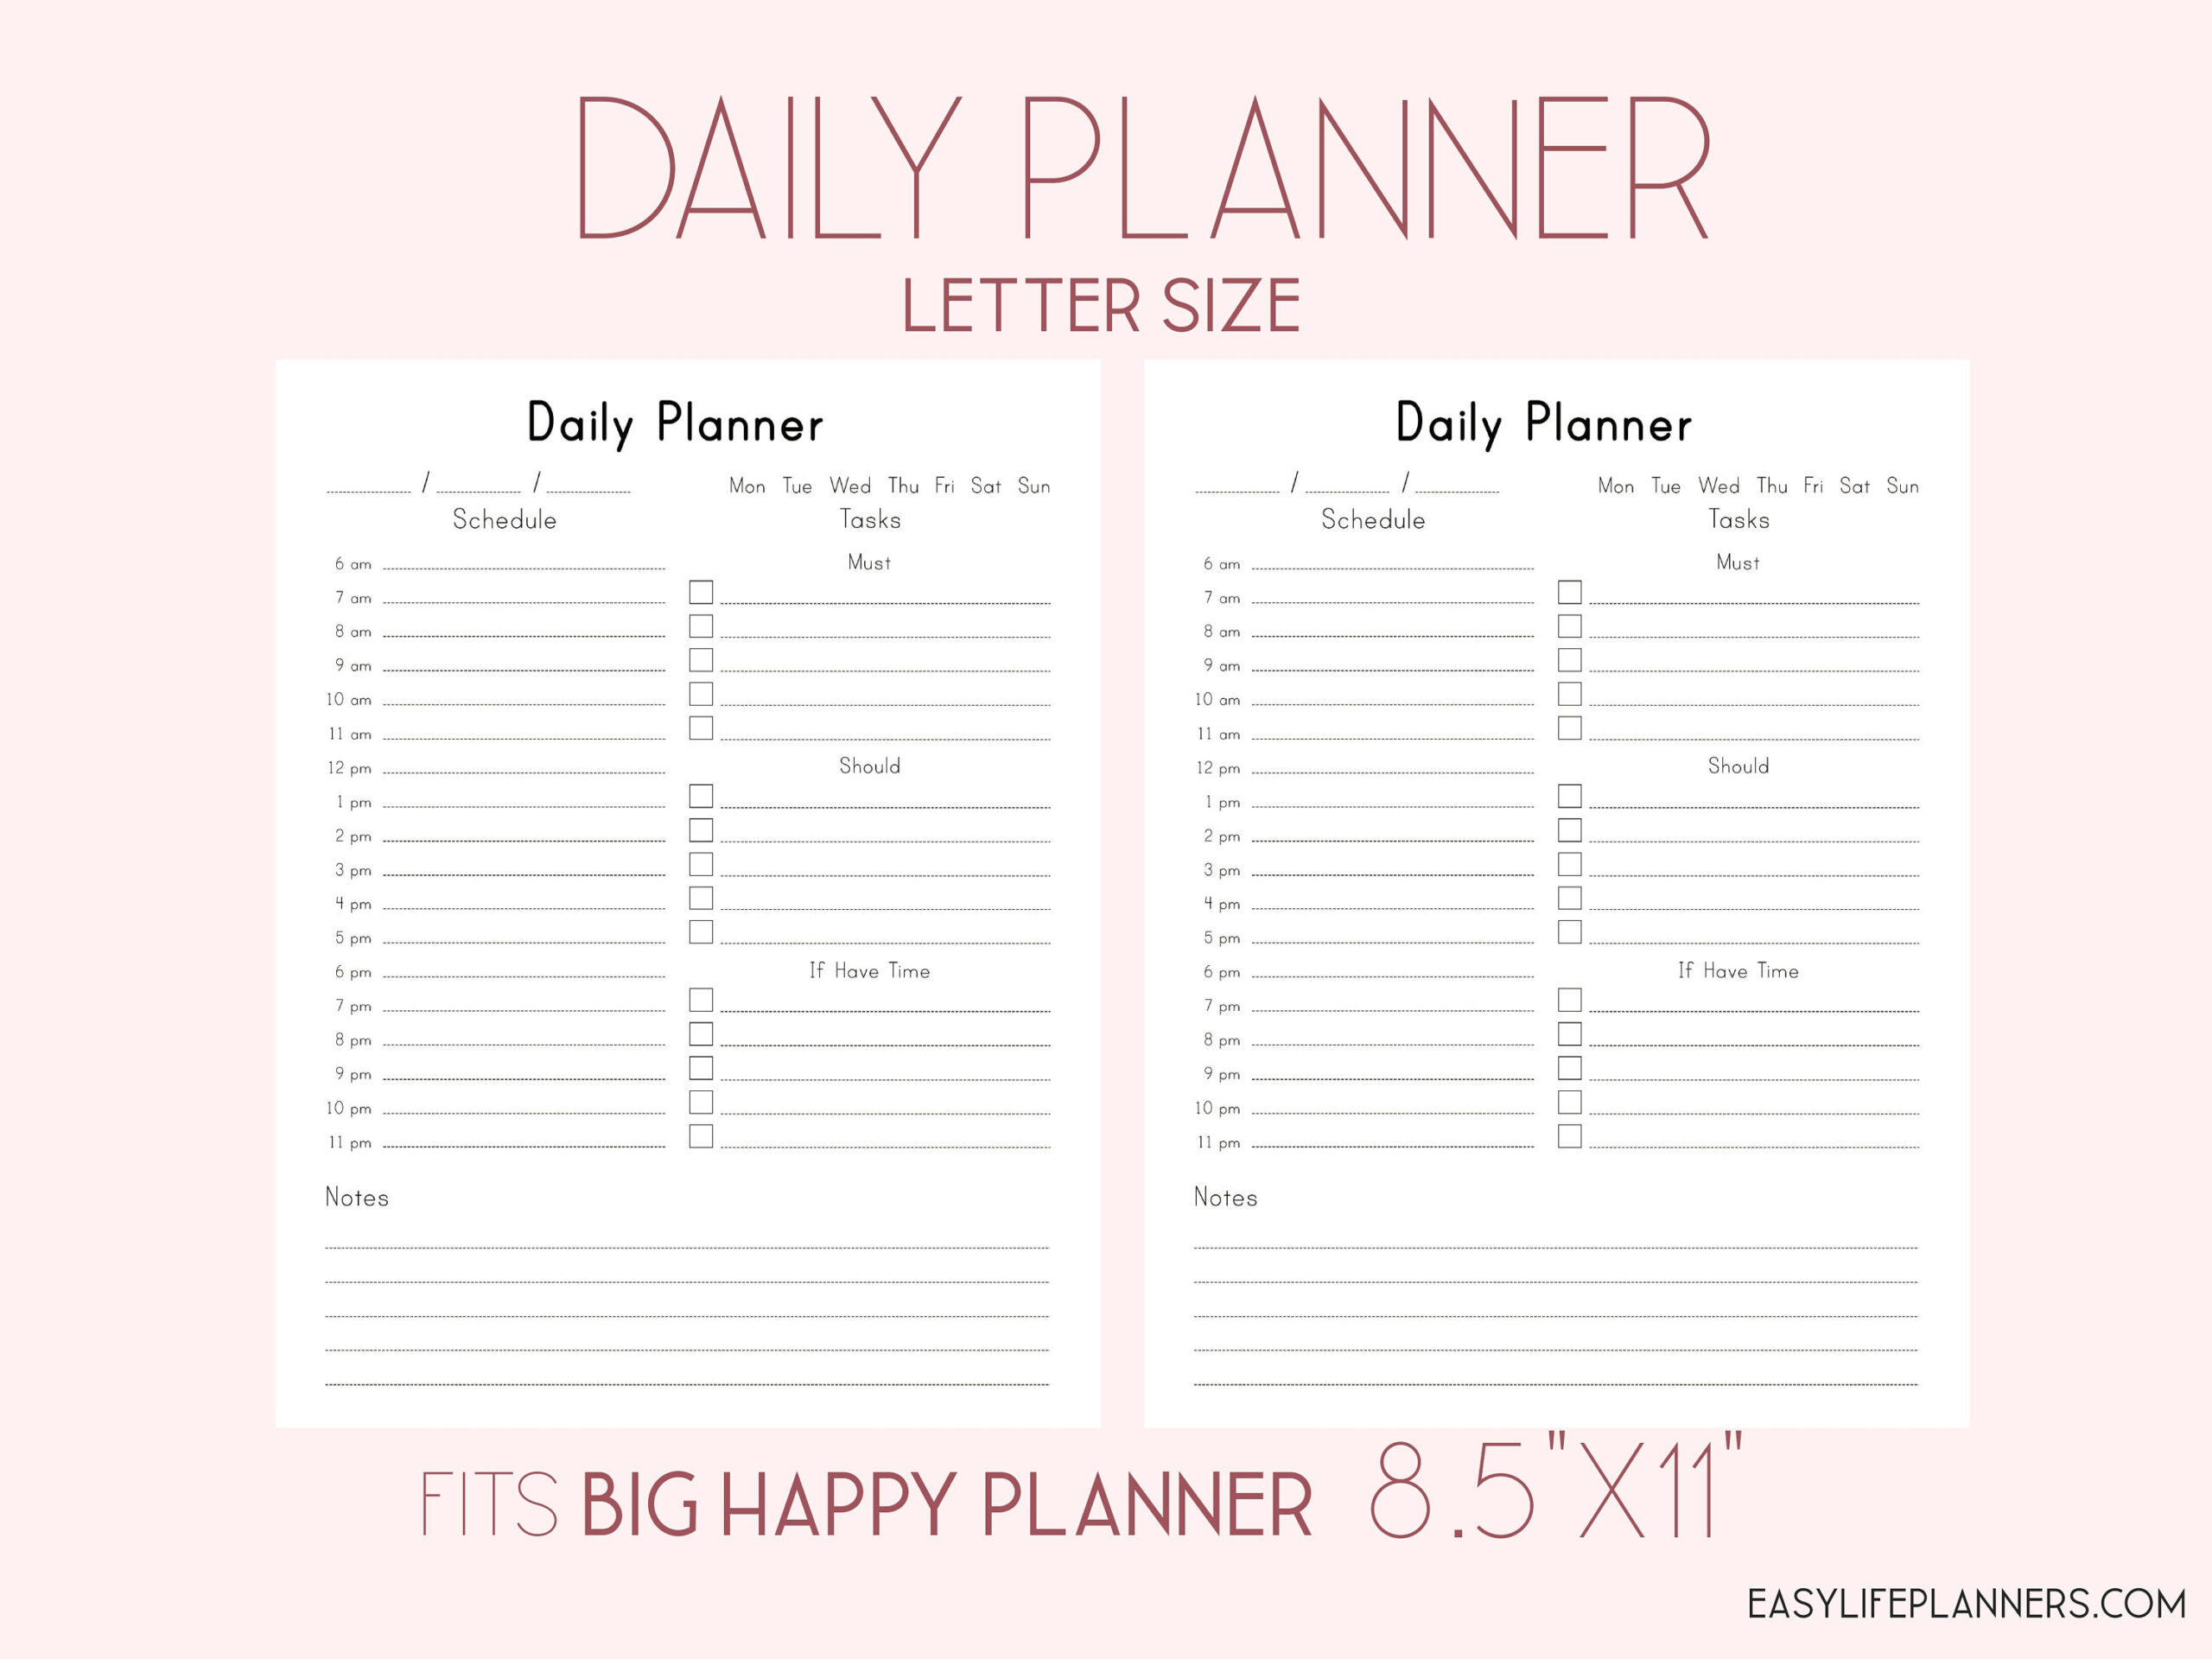 DAILY PLANNER Printable Letter Size Planner 8 5x11 Day On 